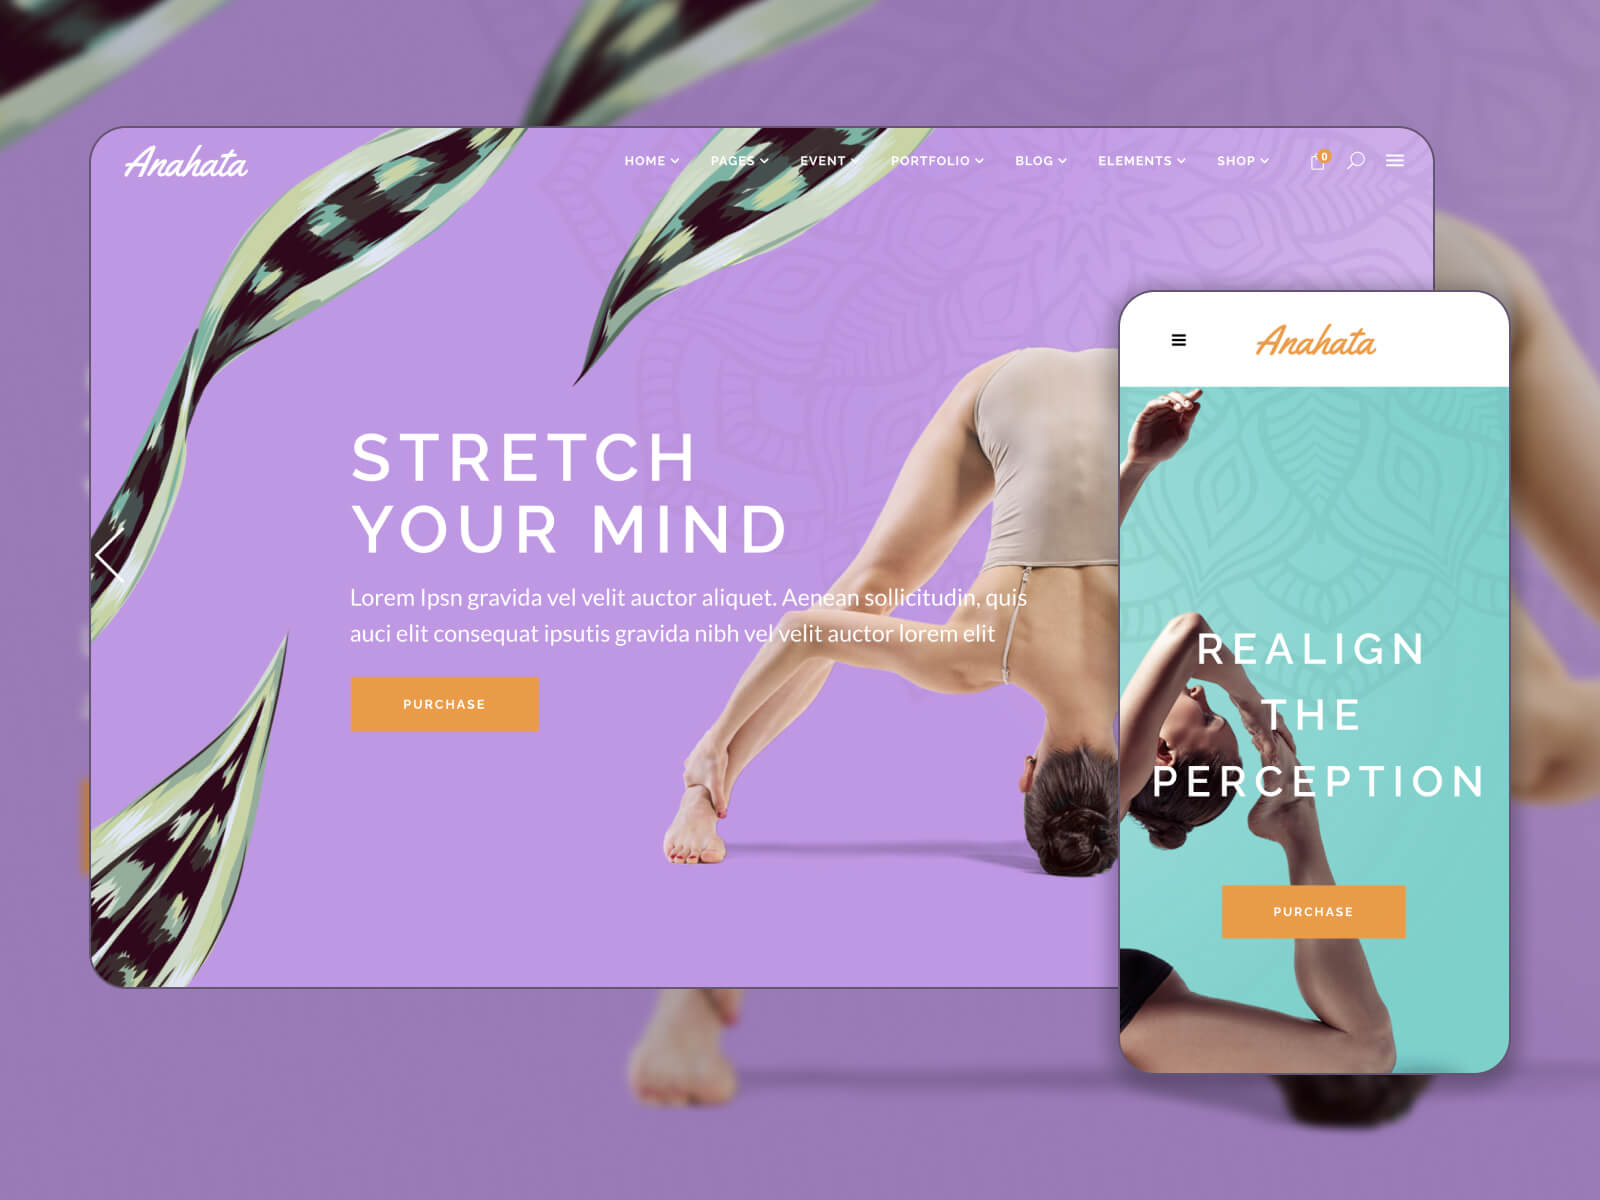 Picture of Anahata - easy-to-use and mindful yoga WP theme in darkslategray, skyblue, rosybrown, gainsboro, and plum color gradation